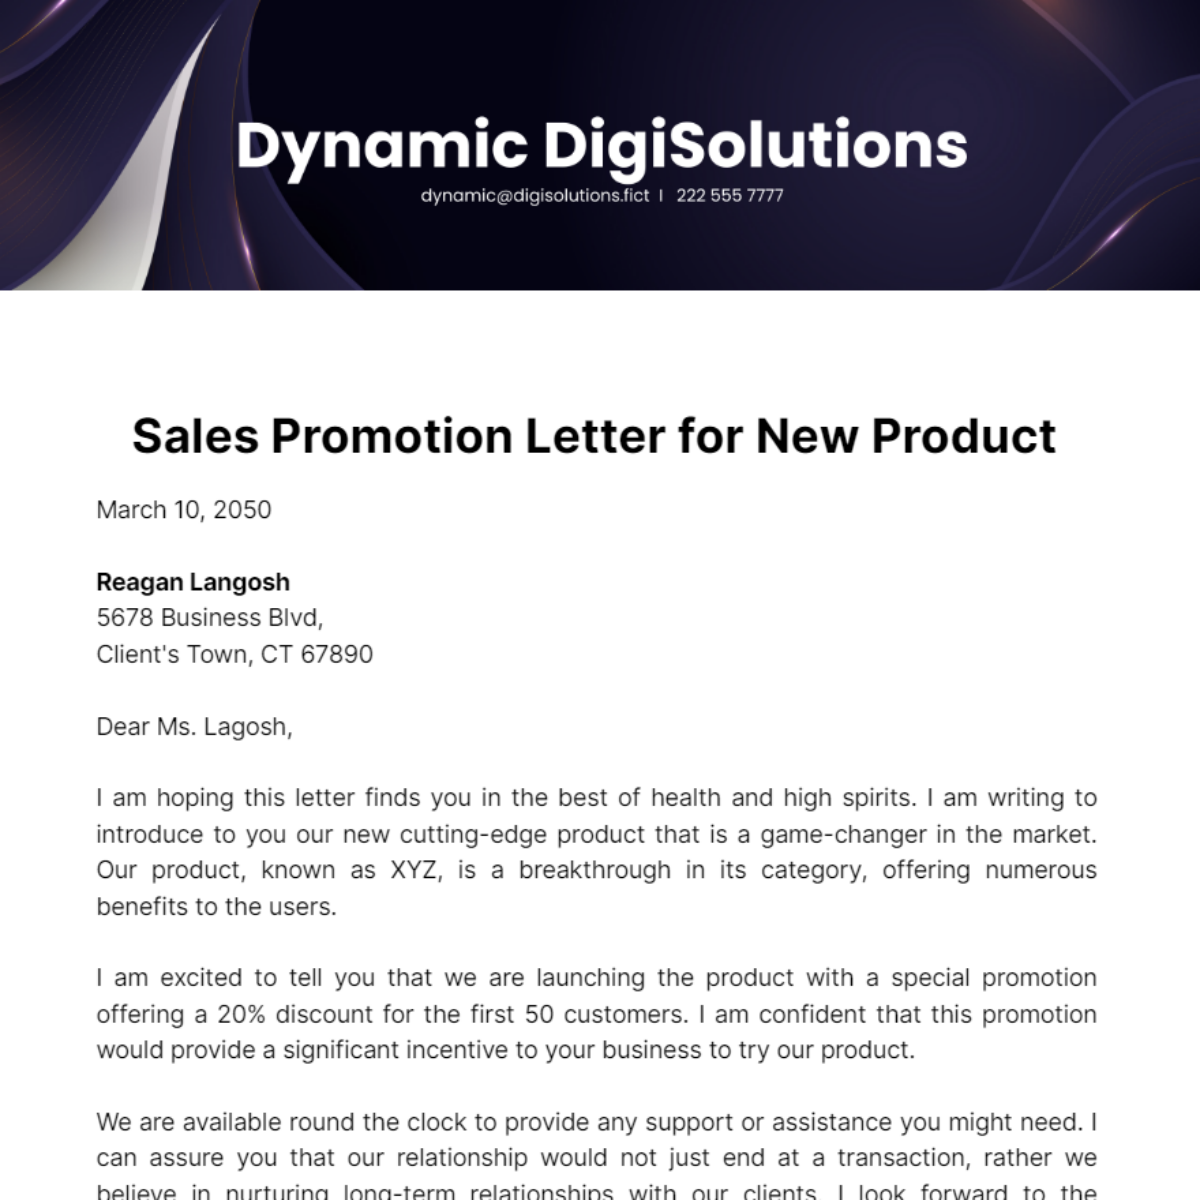 Sales Promotion Letter for New Product Template